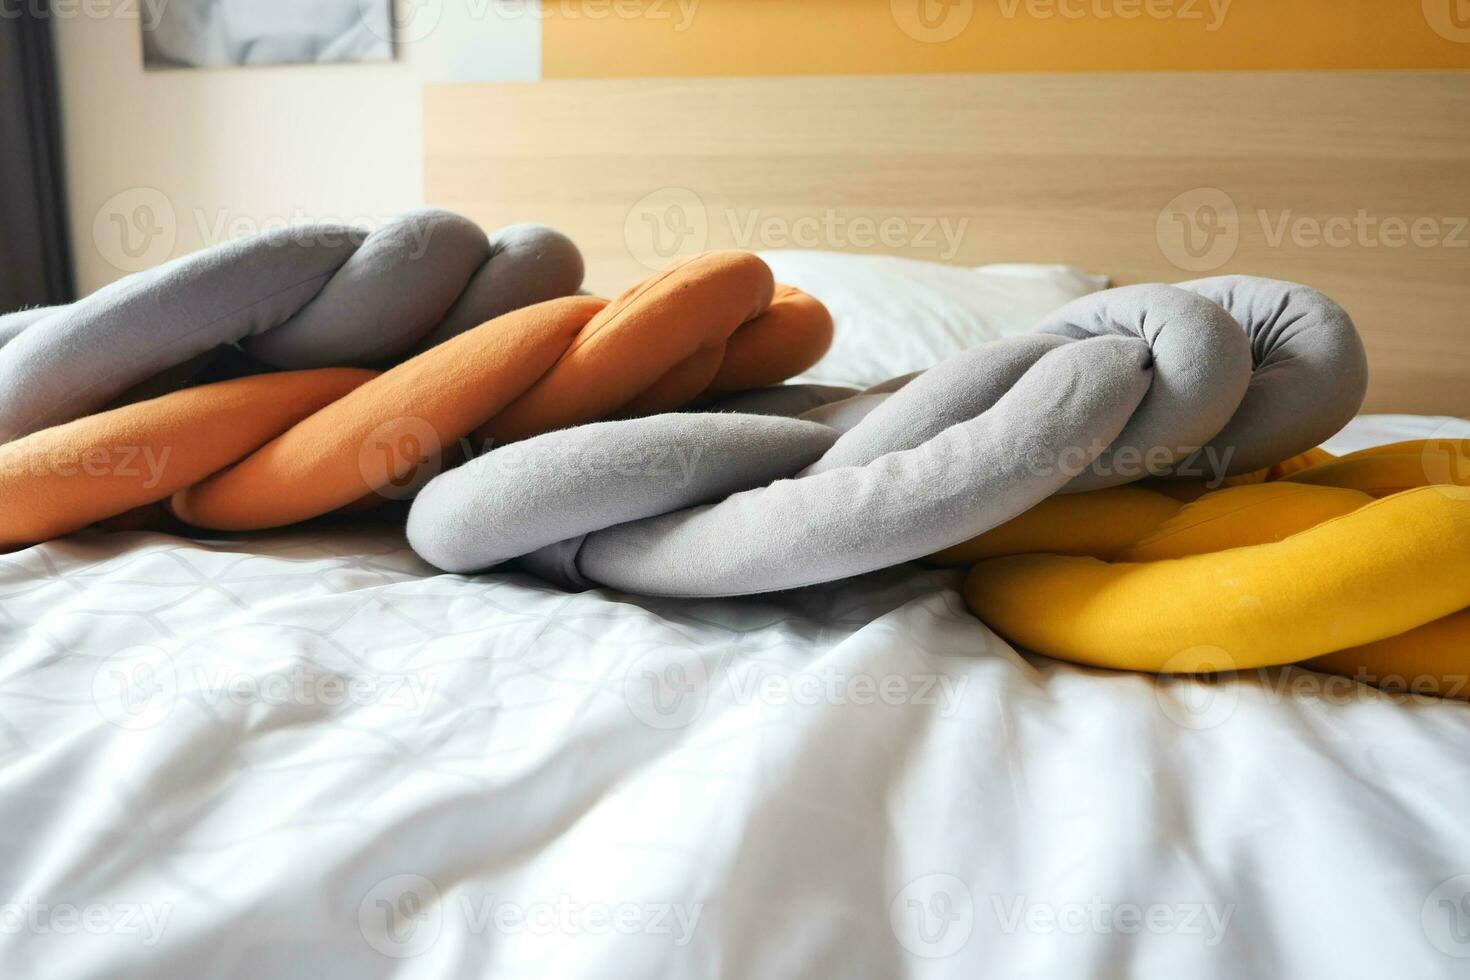 gray, orange and yellow pillows on bed photo